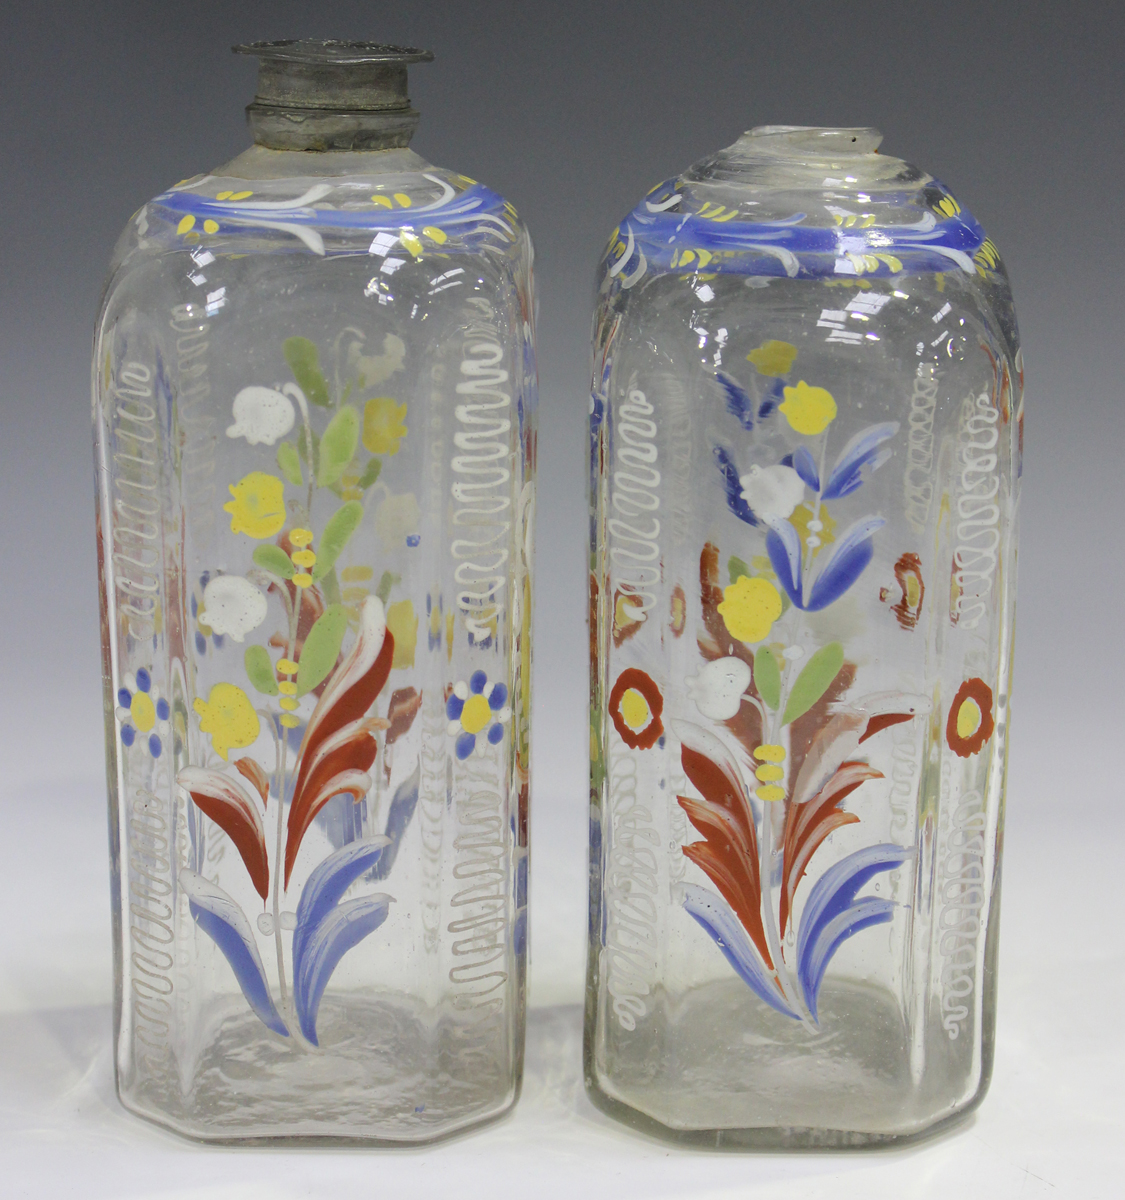 Two German enamelled glass schnapps or liqueur decanters, 18th century, one with original pewter - Image 4 of 6